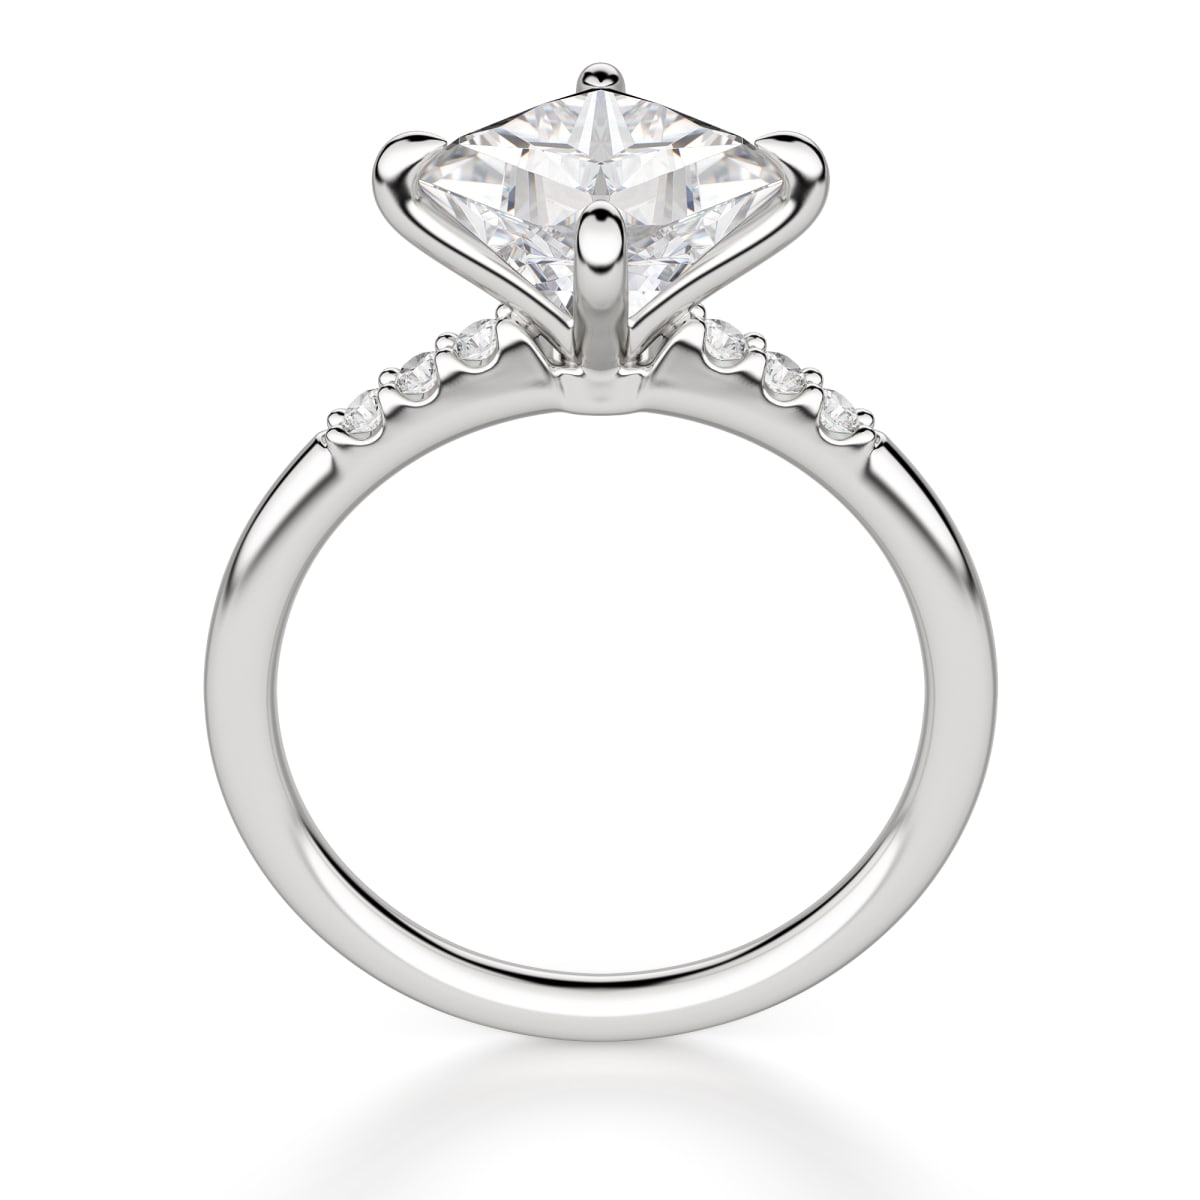 2ct Finley 7.5mm 14kt Moissanite Kite Set Cushion Solitaire Ring,Compass Set  Ring,Cushion Engagement Ring,Unique Solitaire Ring,Wedding Ring